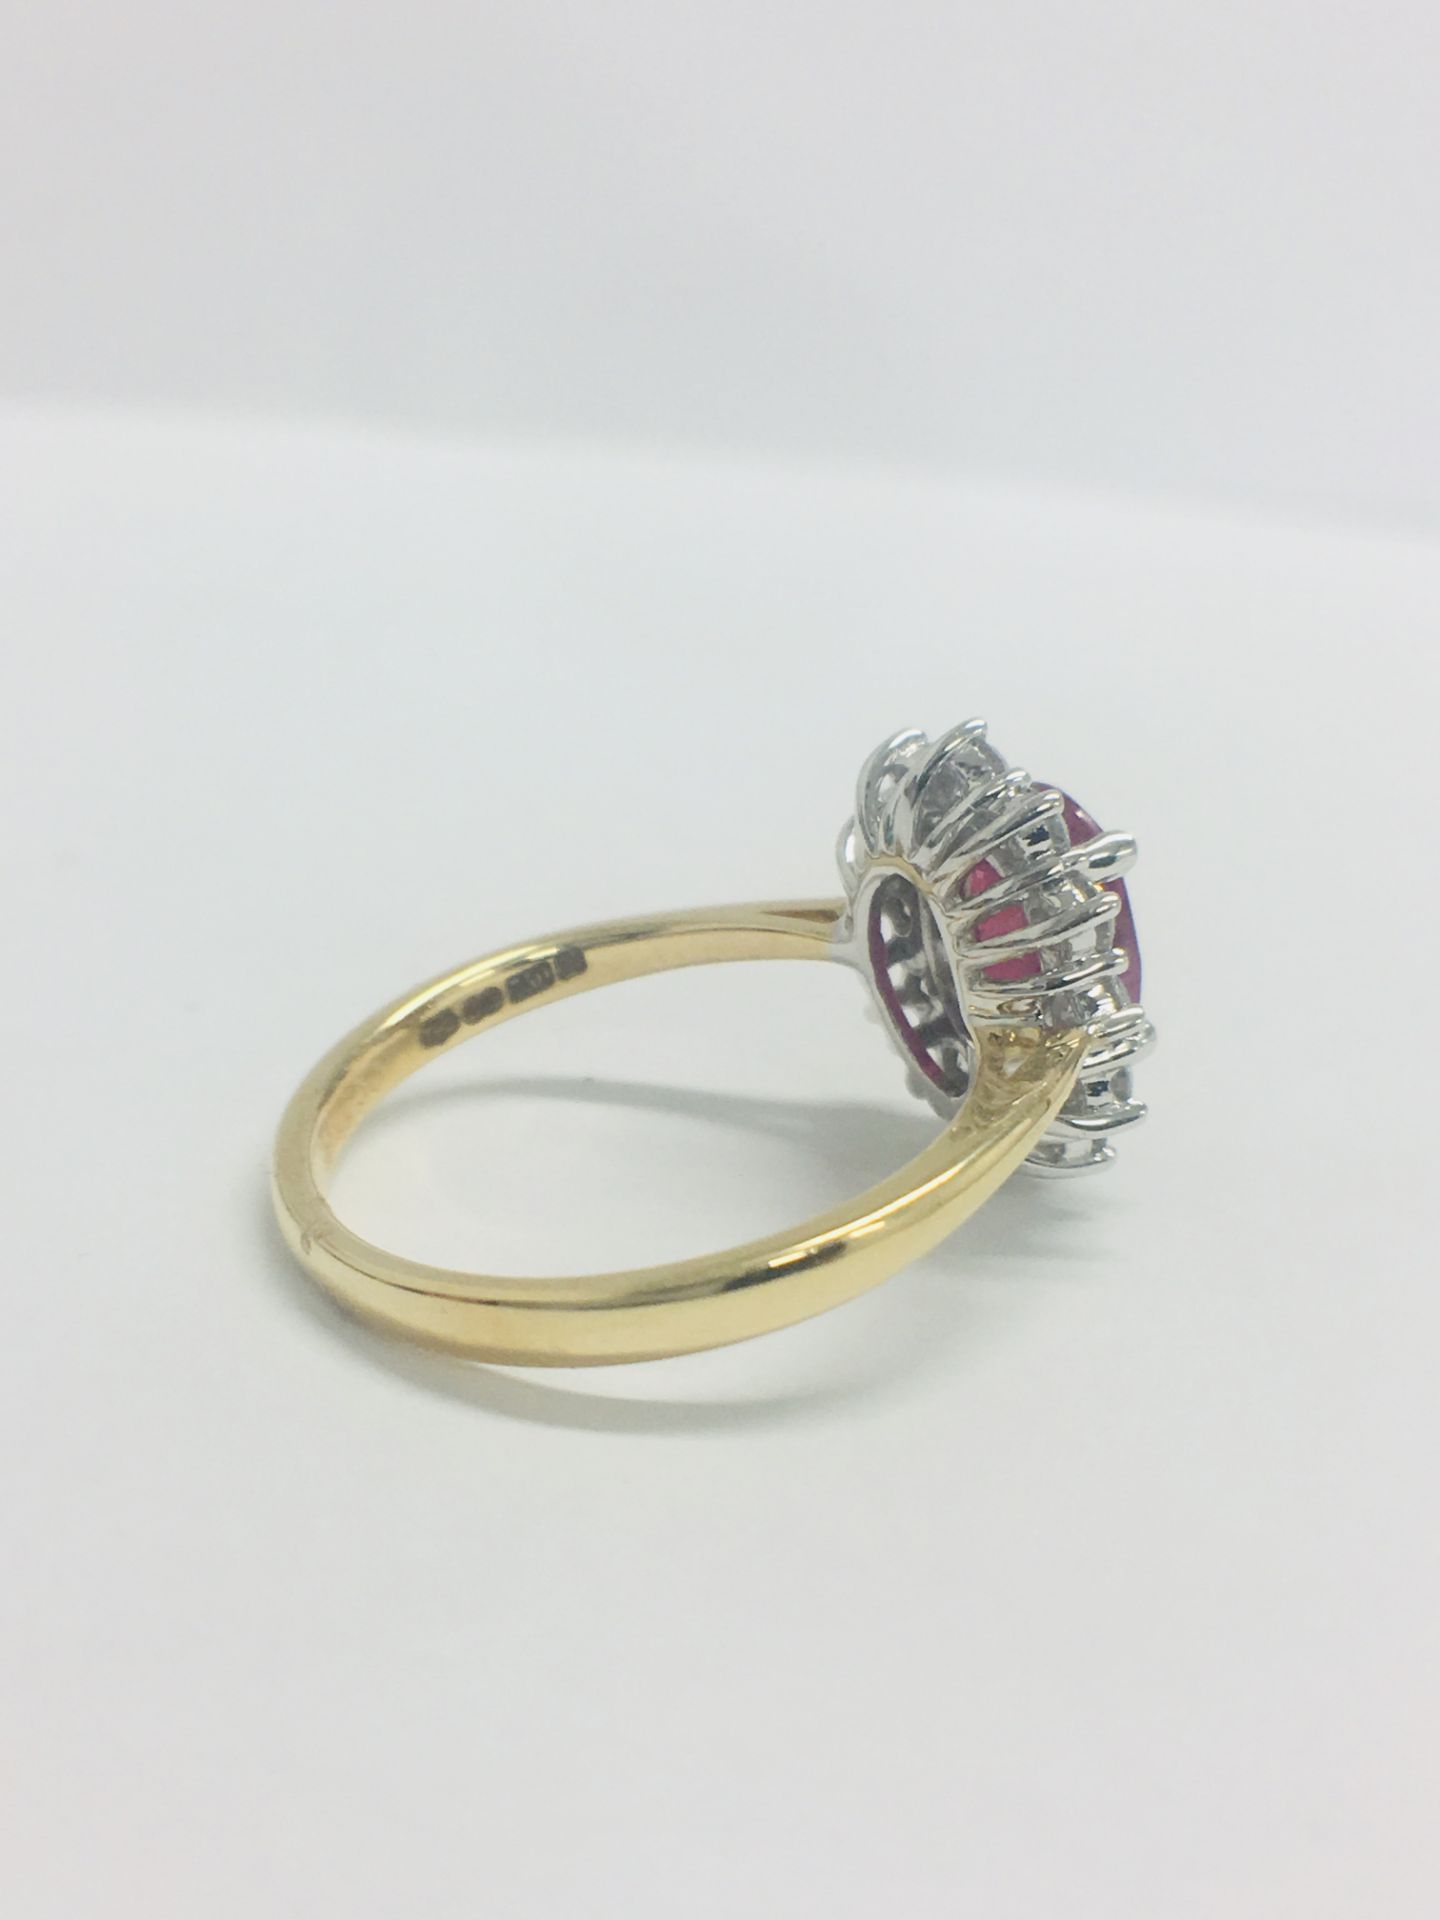 18ct Ruby And Diamond Cluster Ring - Image 6 of 11